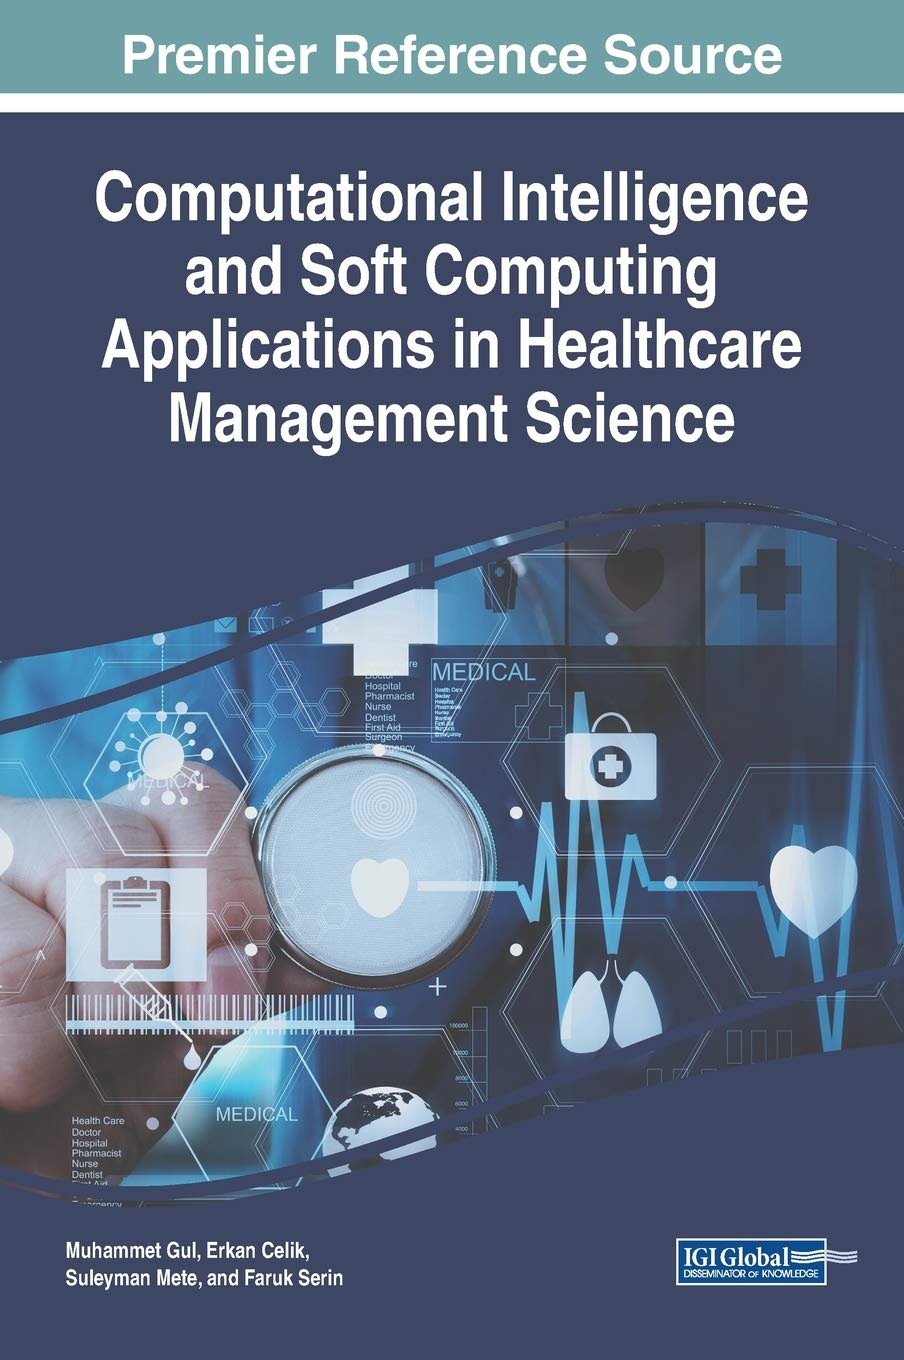 Computational Intelligence and Soft Computing Applications in Healthcare Management Science |